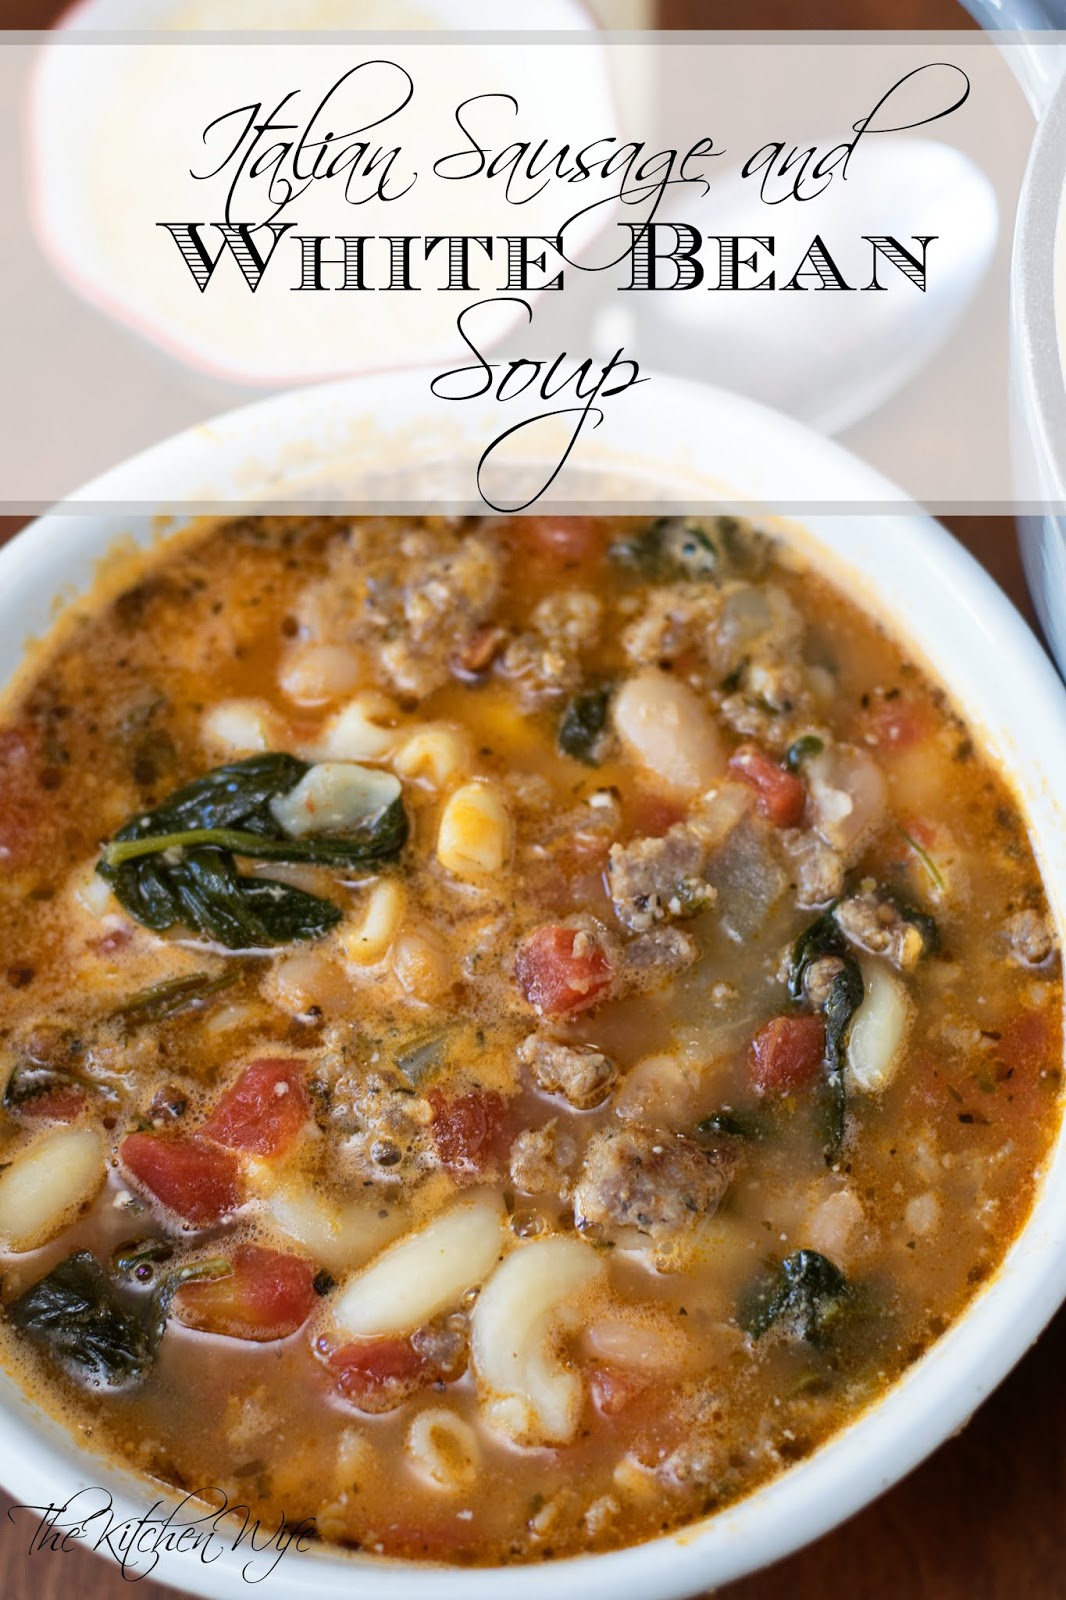 Italian Sausage and White Bean Soup Recipe - The Kitchen Wife